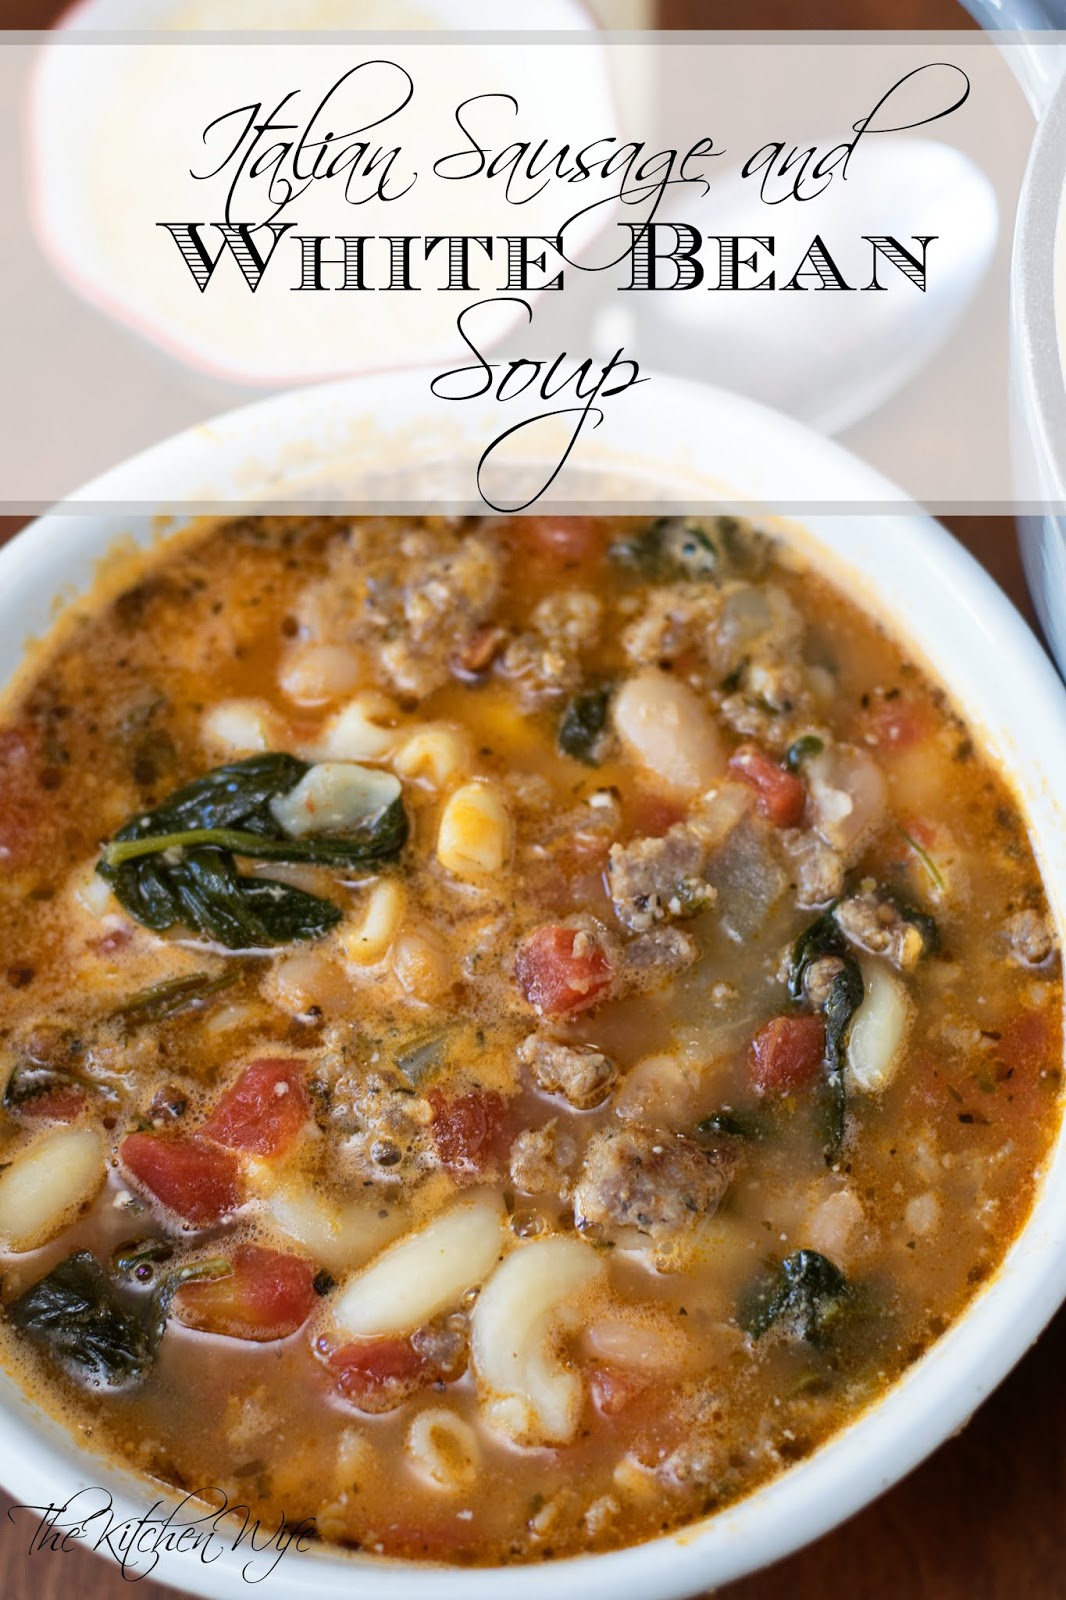 Italian Sausage and White Bean Soup Recipe - The Kitchen Wife